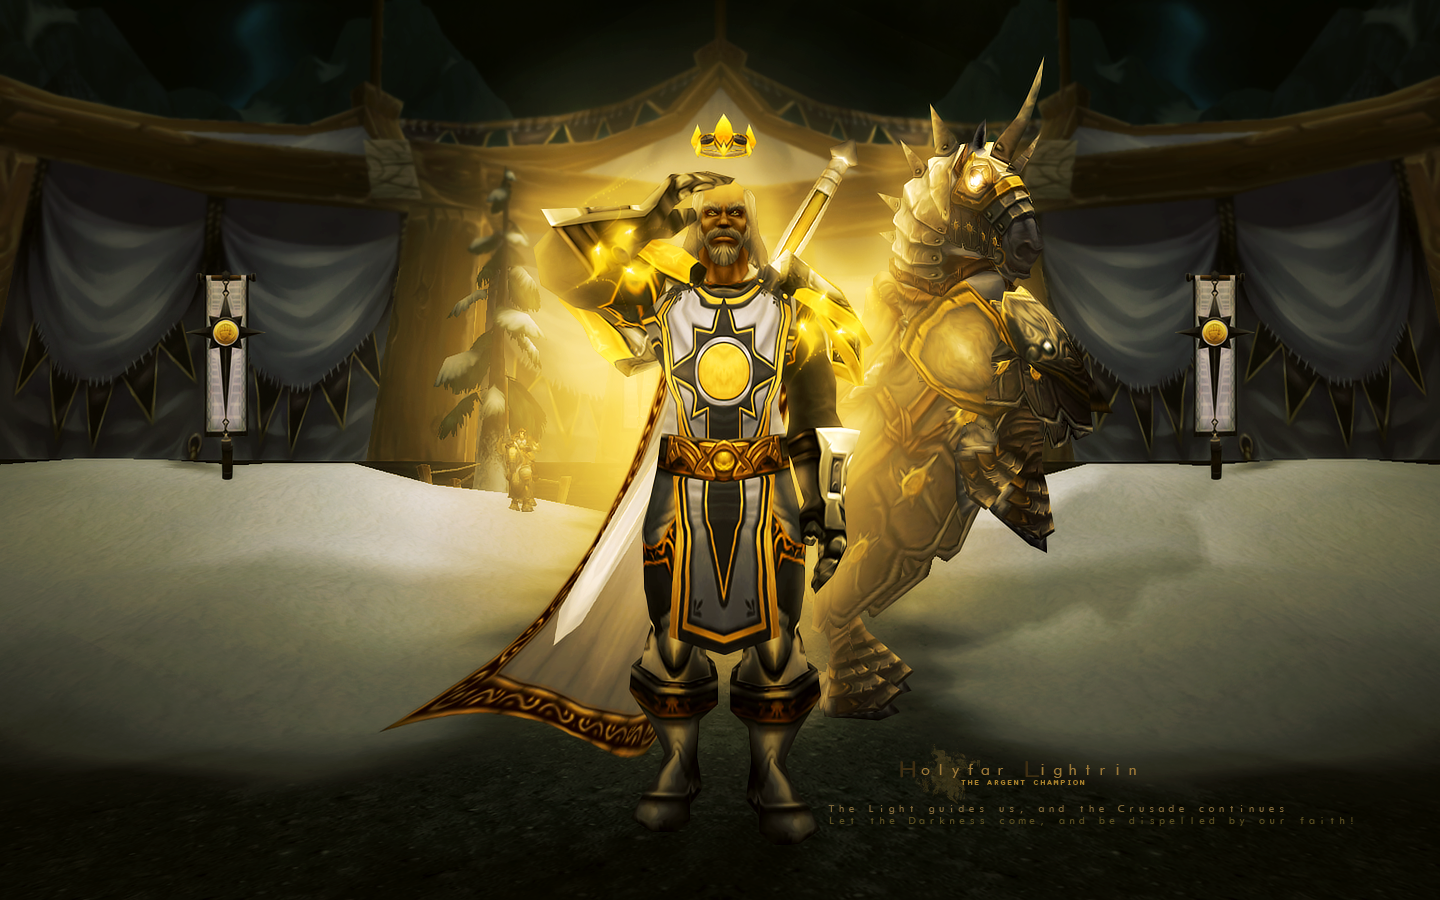 Paladin backgrounds for your downloading pleasure. More classes to